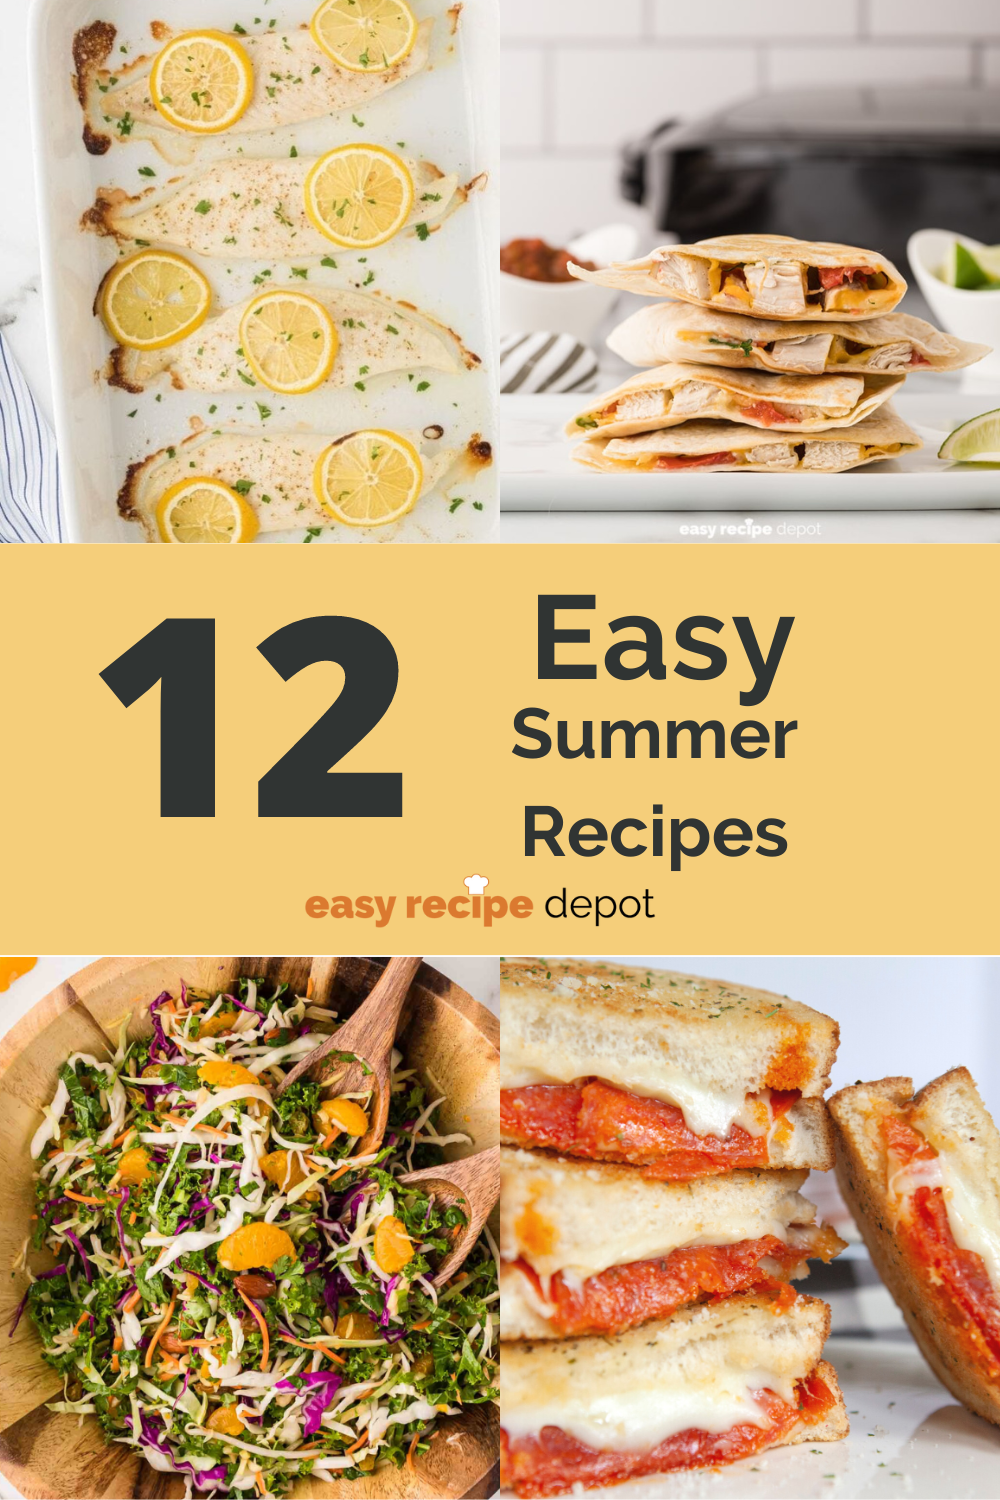 Easy summer recipes collage including fish, quesadillas, salad, and sandwiches.